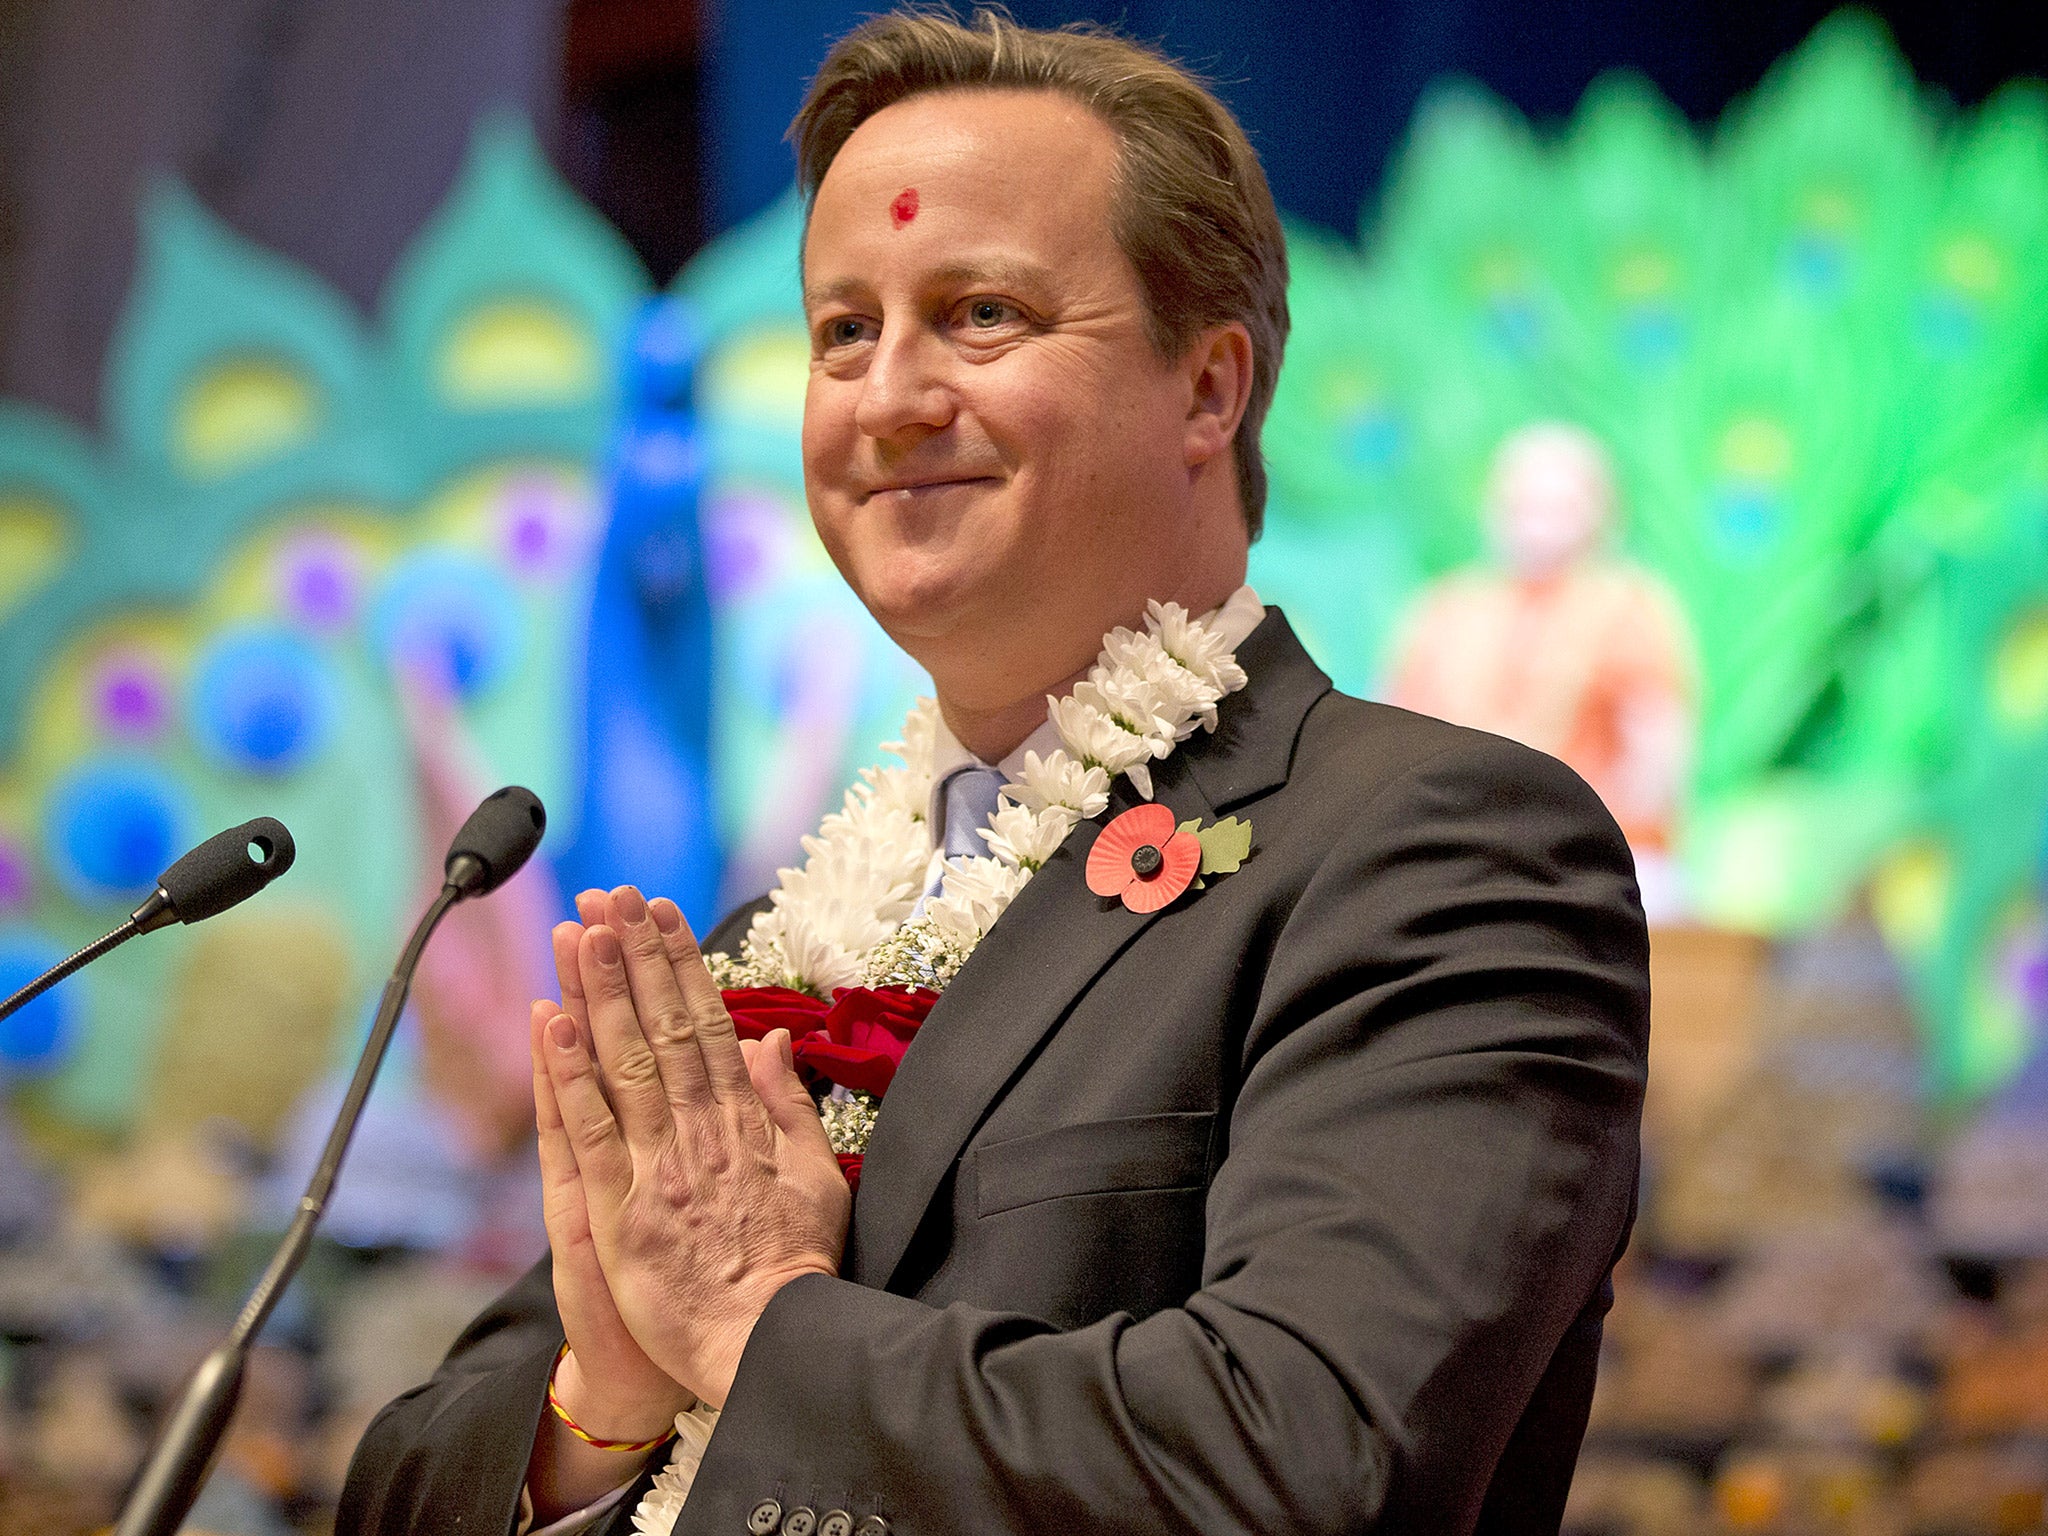 David Cameron taking part in a ceremony at the Hindu temple Shri Swaminarayan Mandir in London, earlier this month